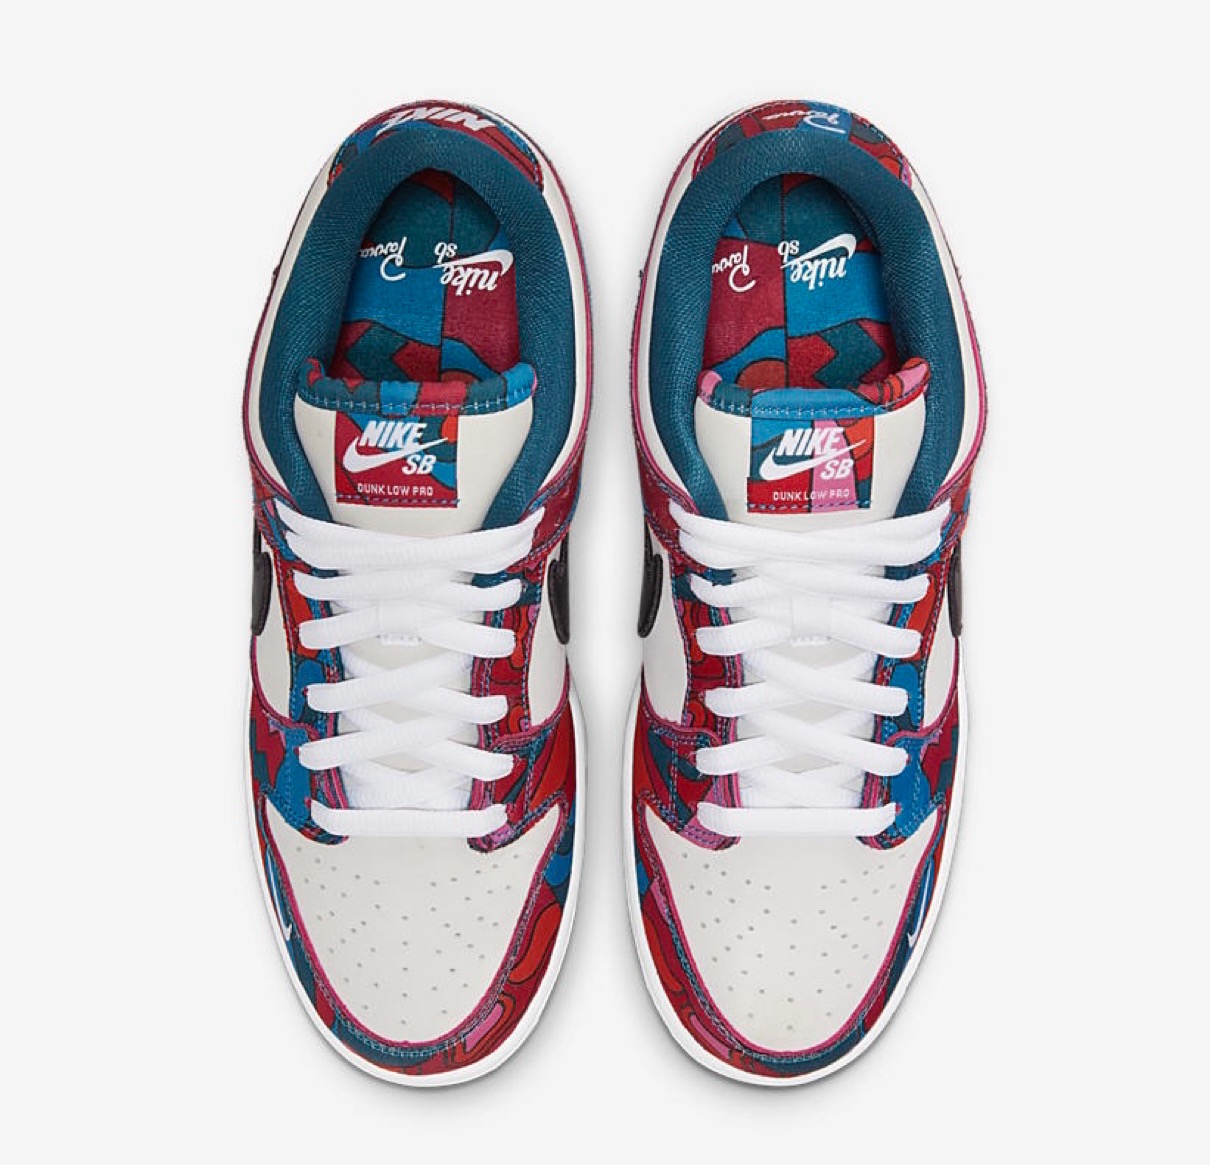 Parra Nike SB】Dunk Low Pro “Abstract Art”が国内7月29日/7月31日に発売予定 | UP TO DATE